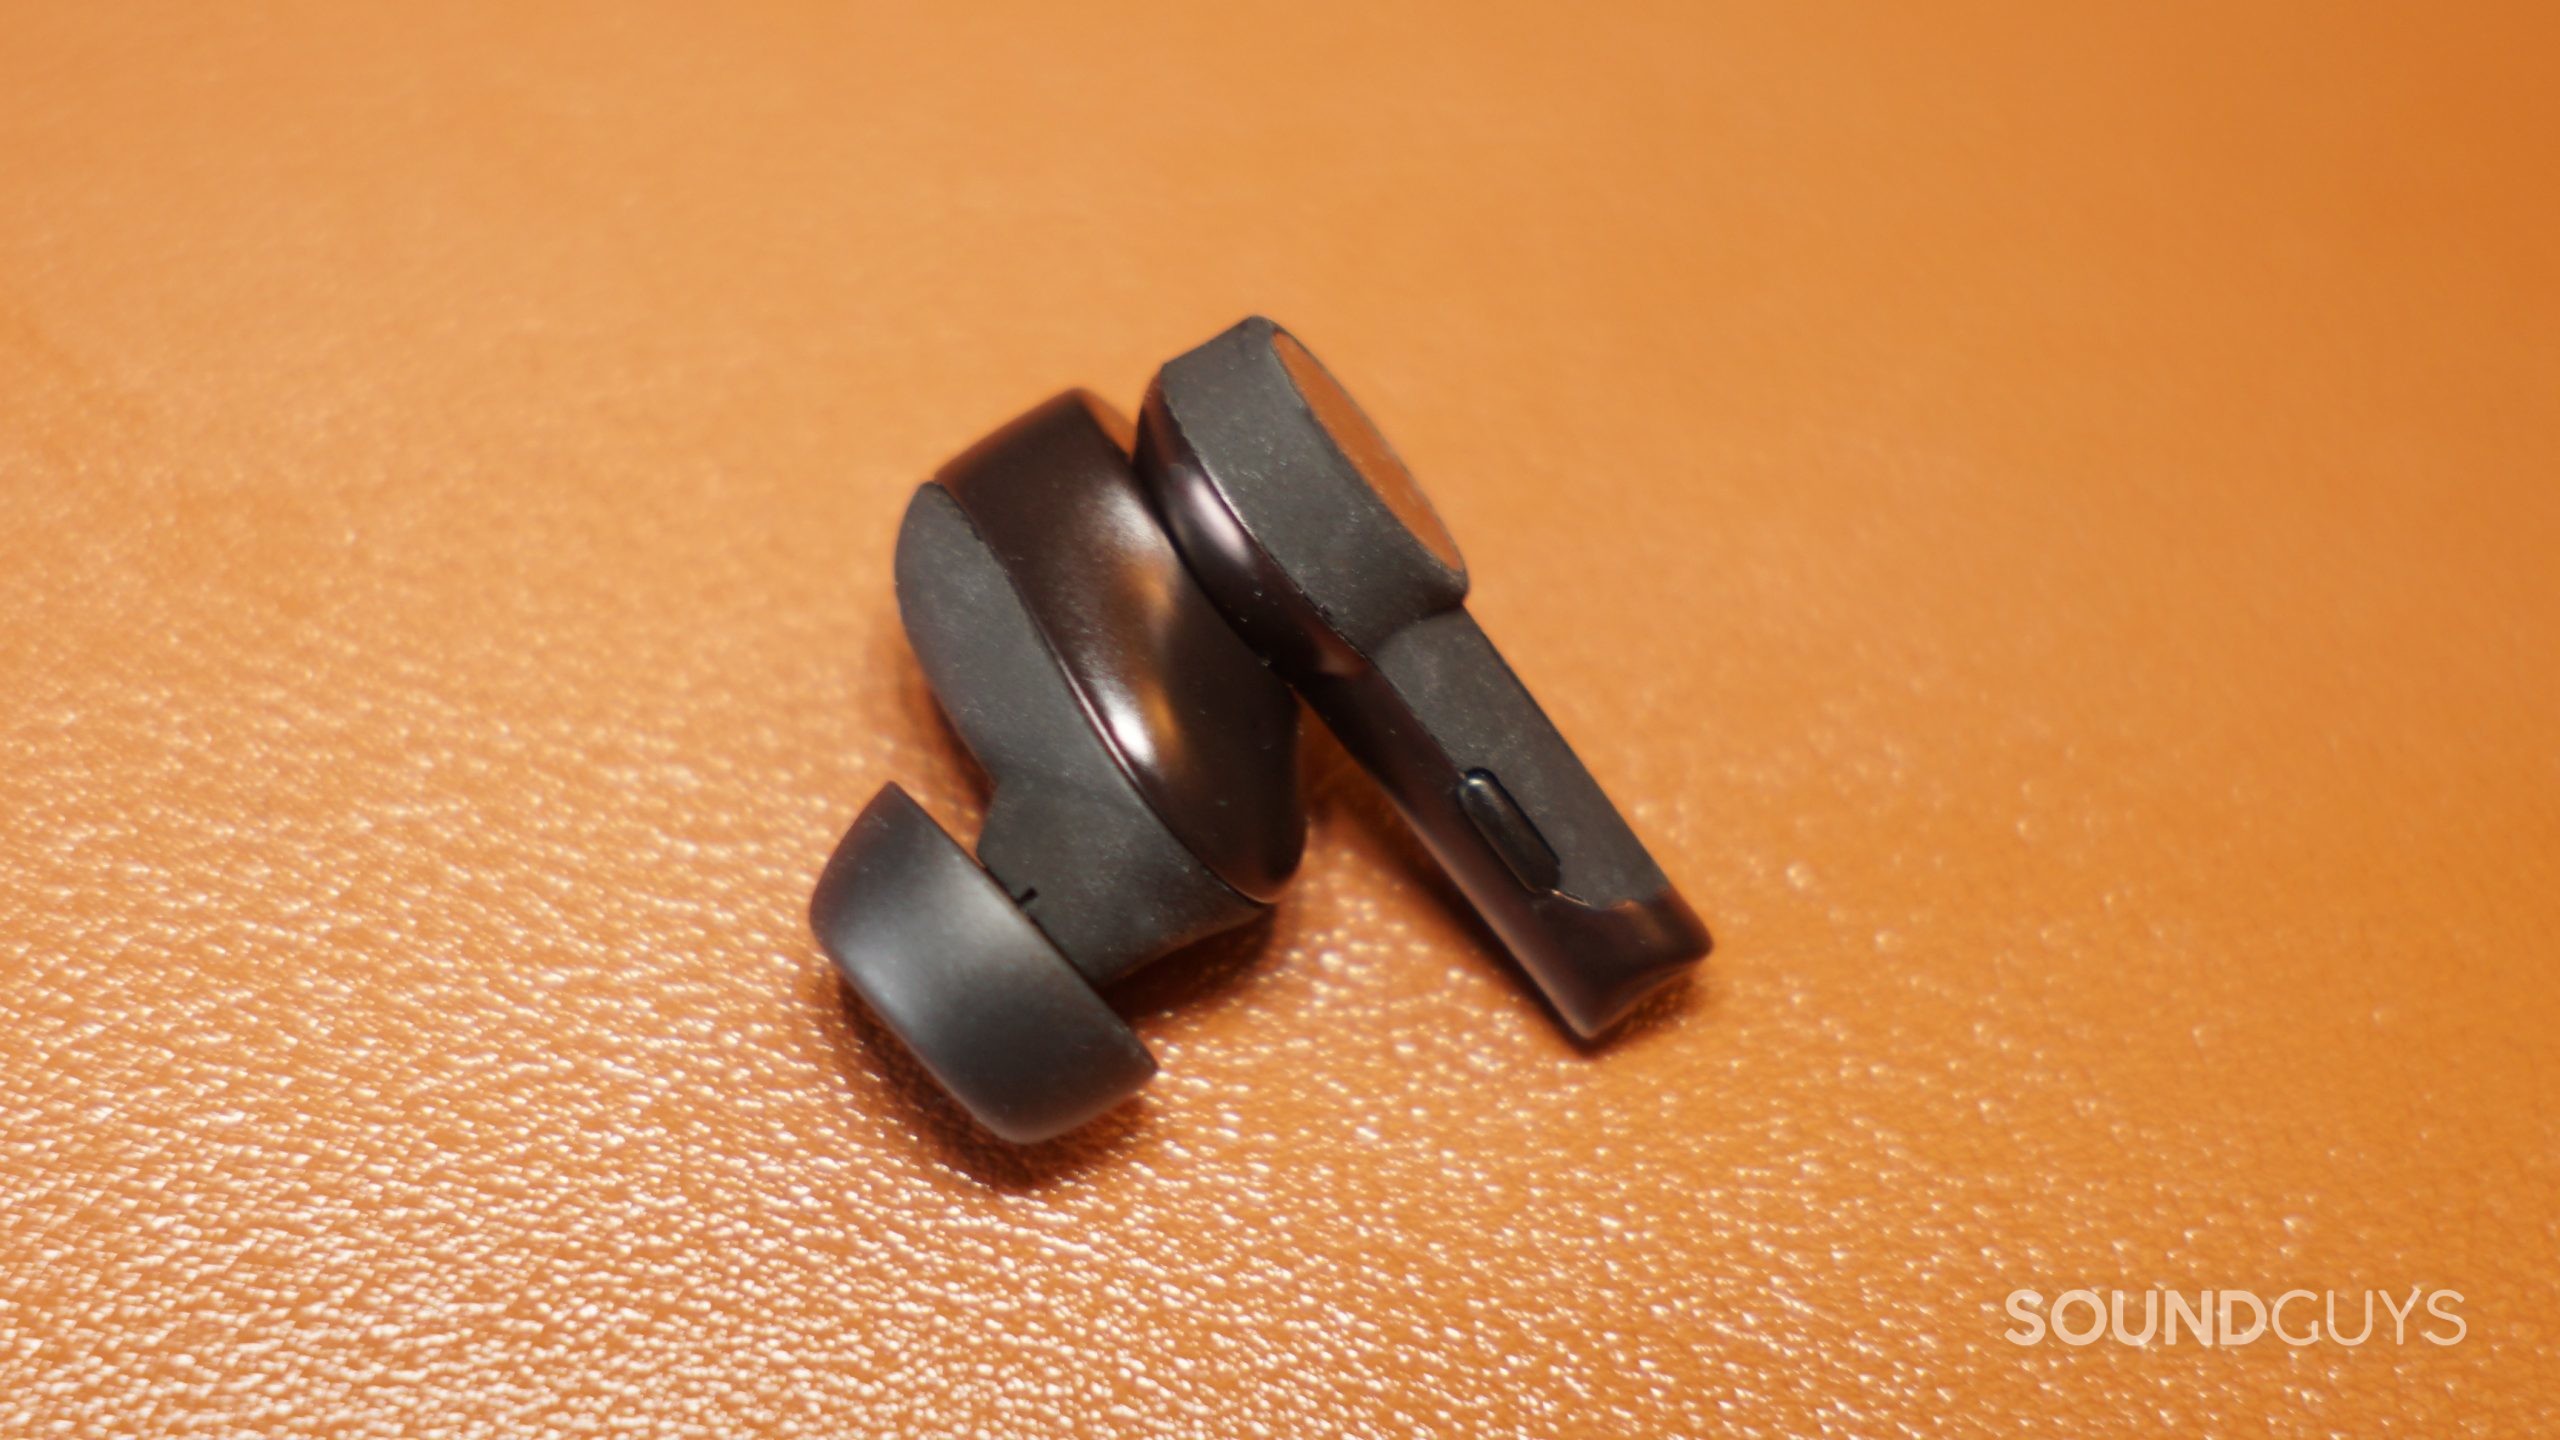 A single Audio-Technica ATH-TWX9 earbud lays on a leather surface.